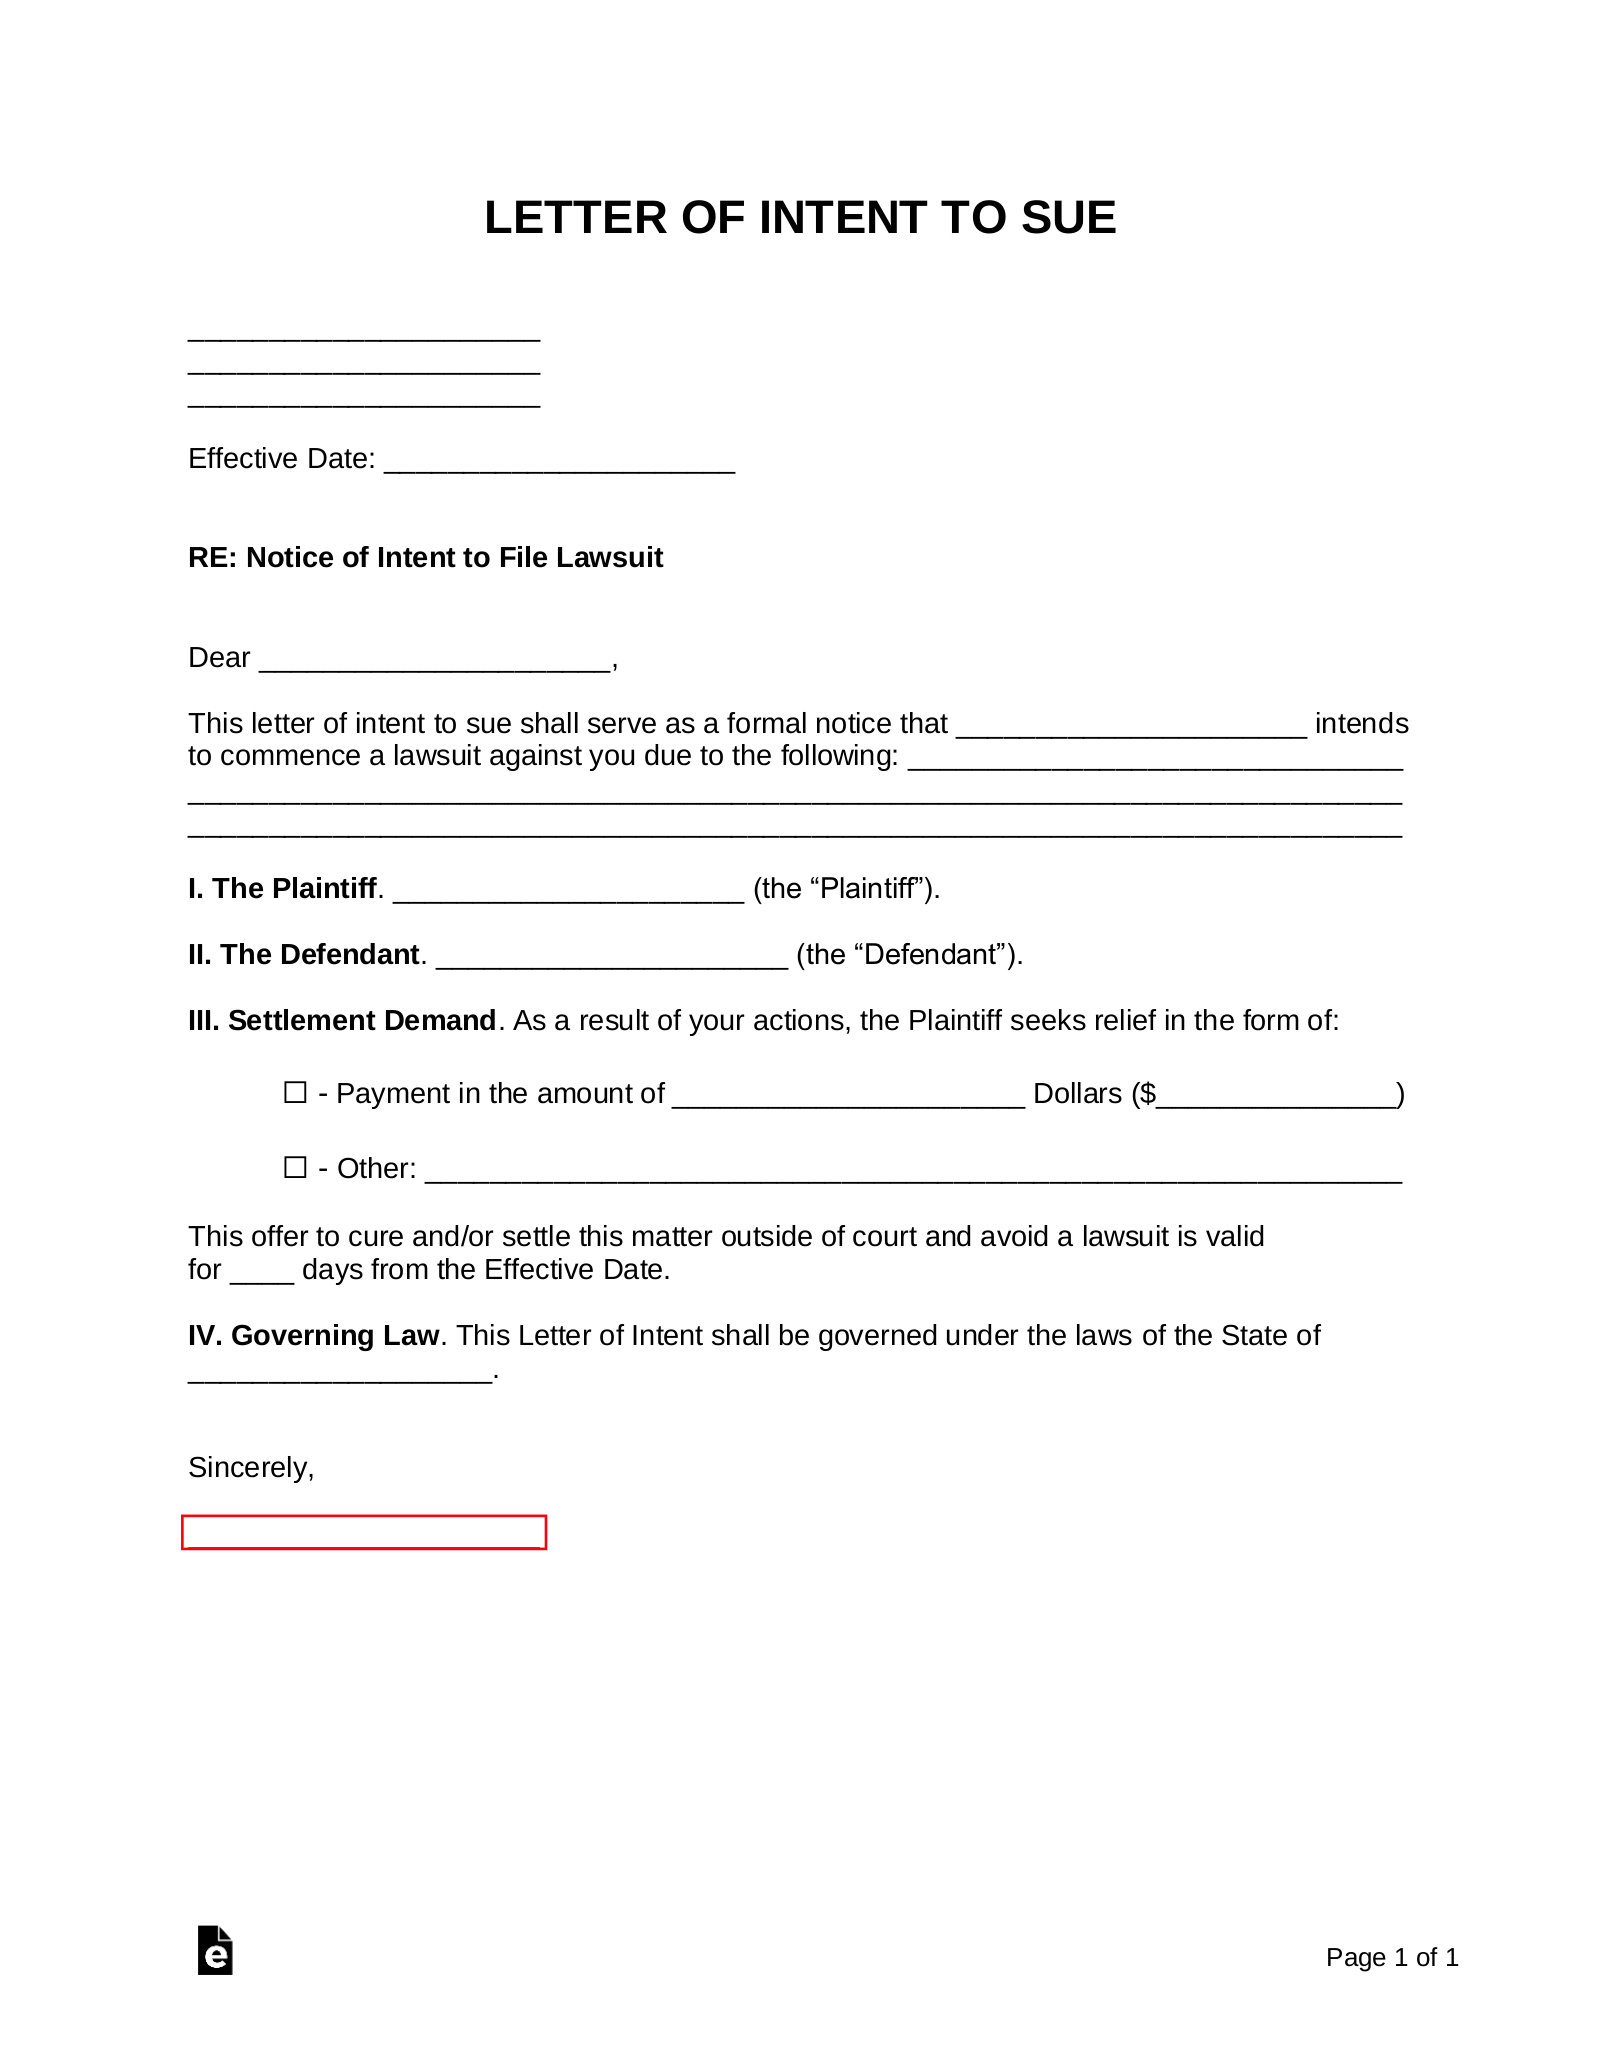 Letter of Intent to Sue (with Settlement Demand) | Sample